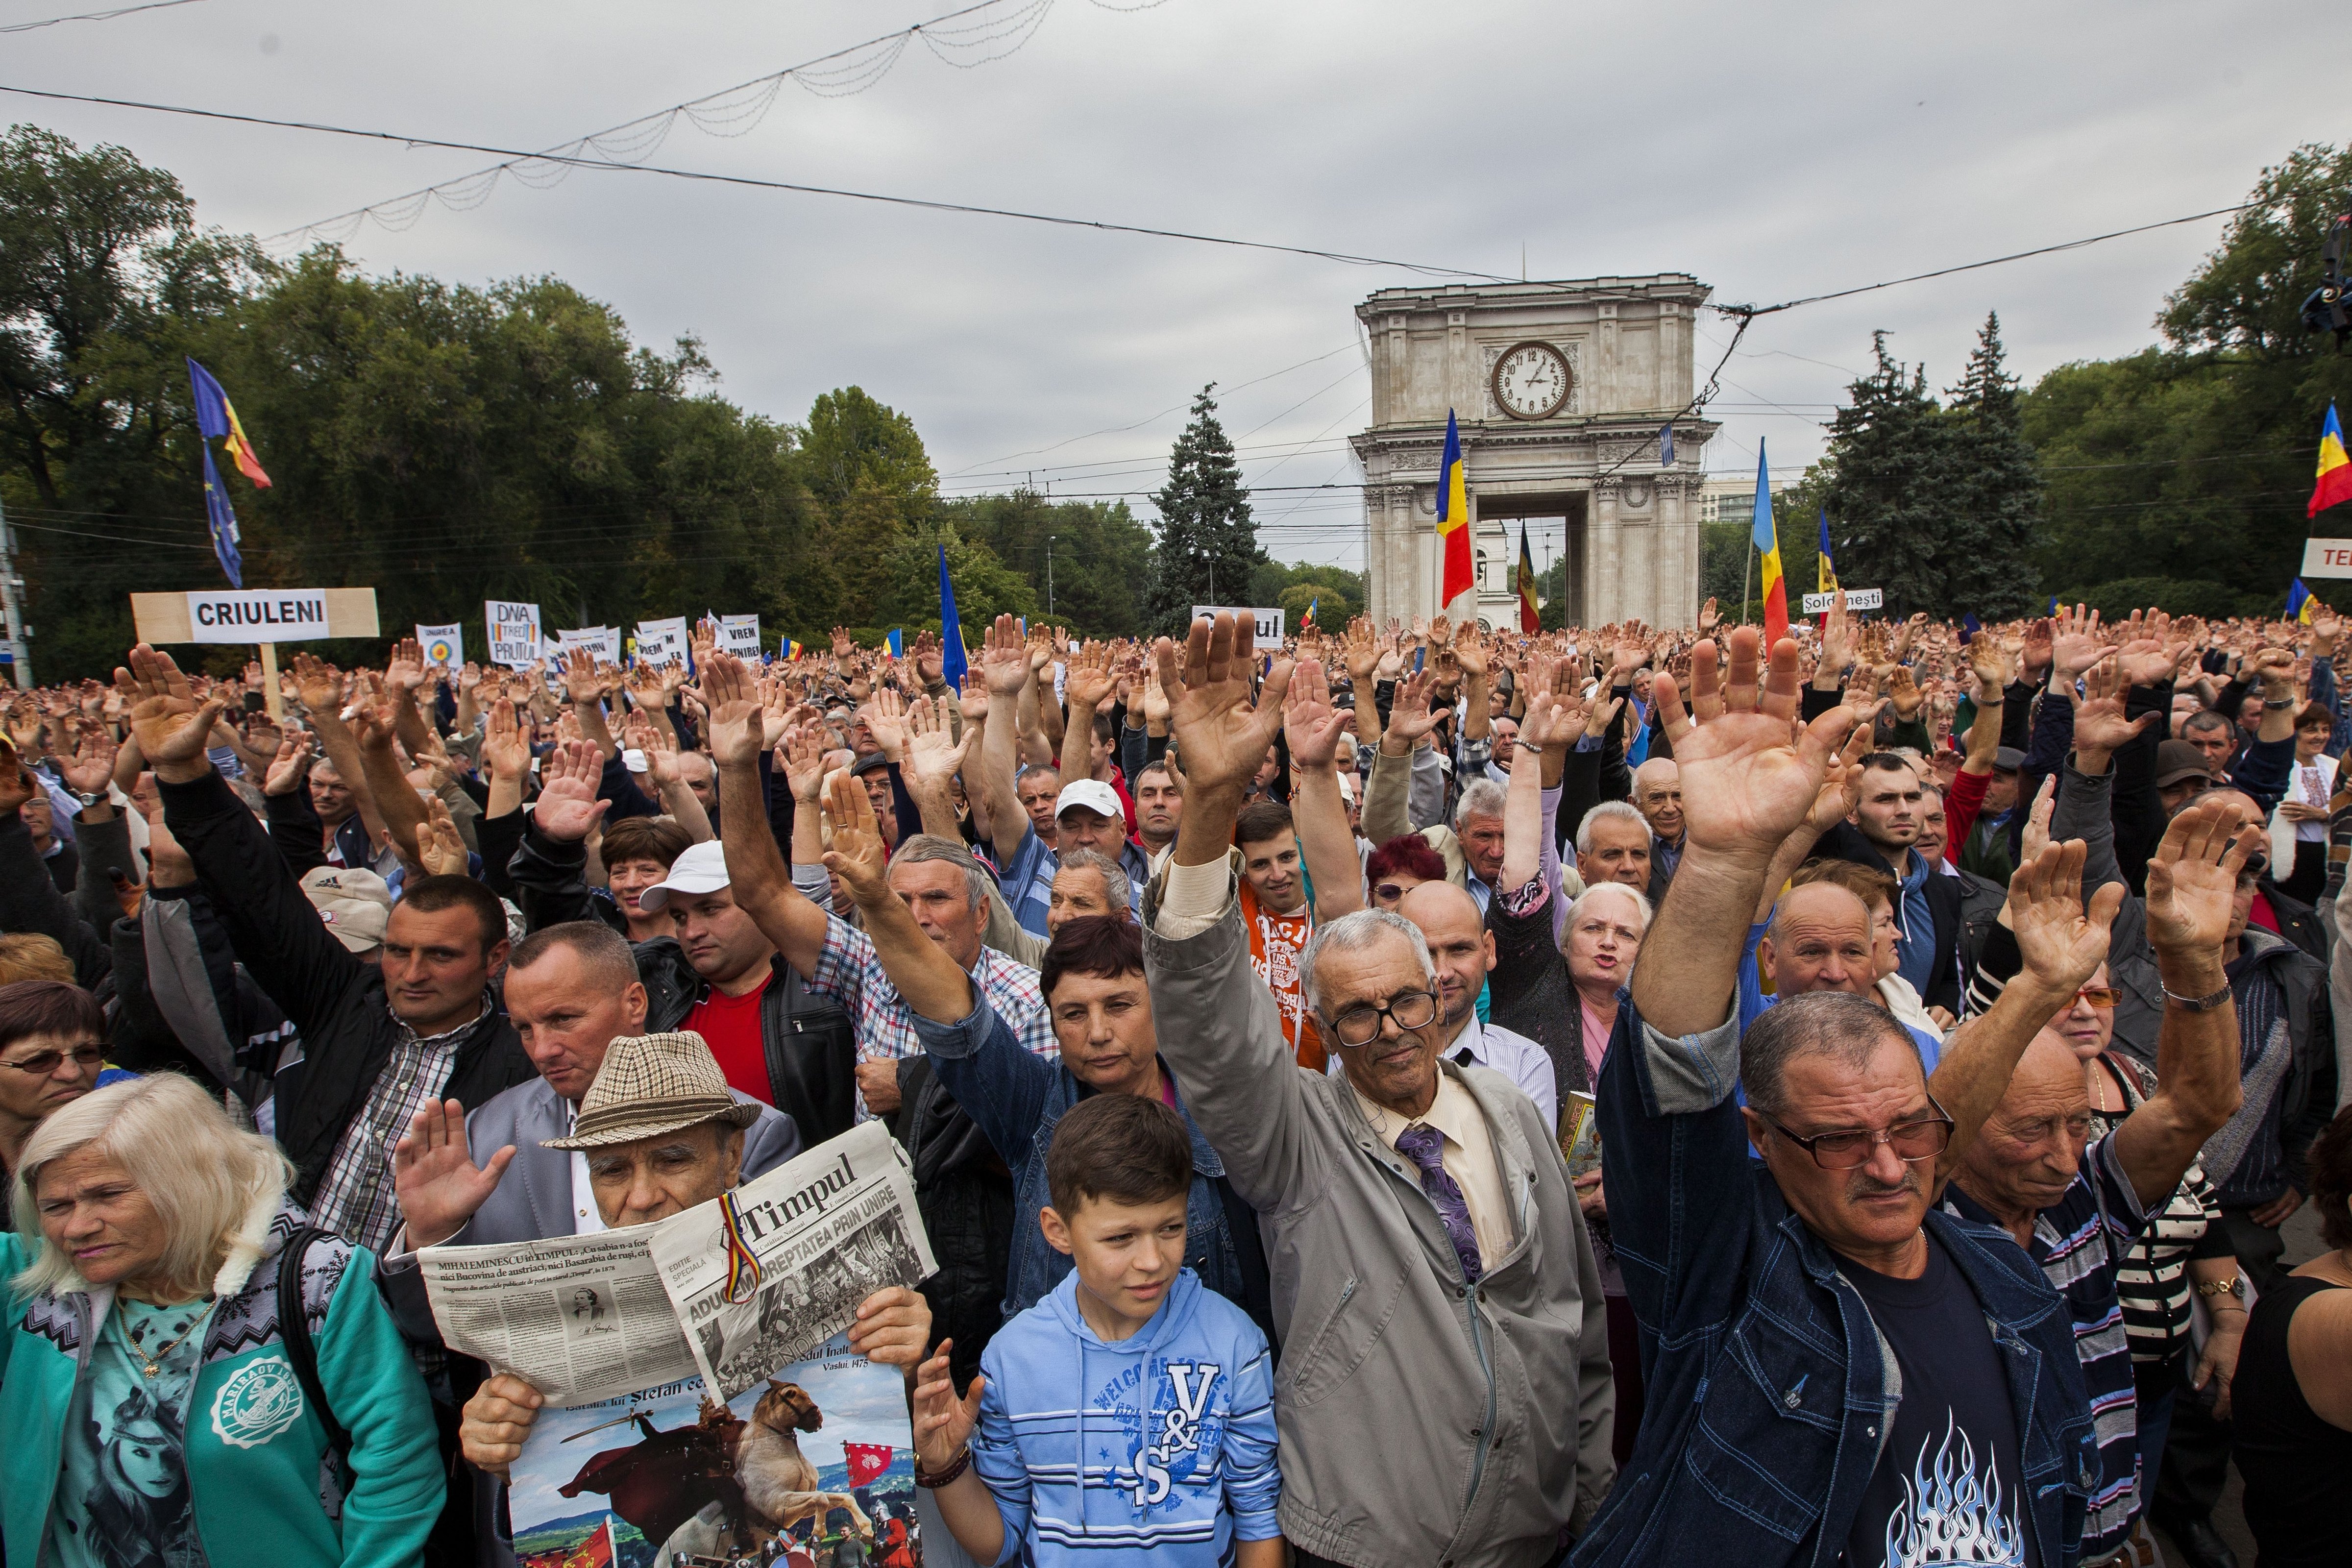 Protesters take part in a rally demanding the resignation of President Nicolae Timofti in Chisinau, Moldova, on Sept. 13, 2015 (Ion Zaharia—Anadolu Agency/Getty Images)